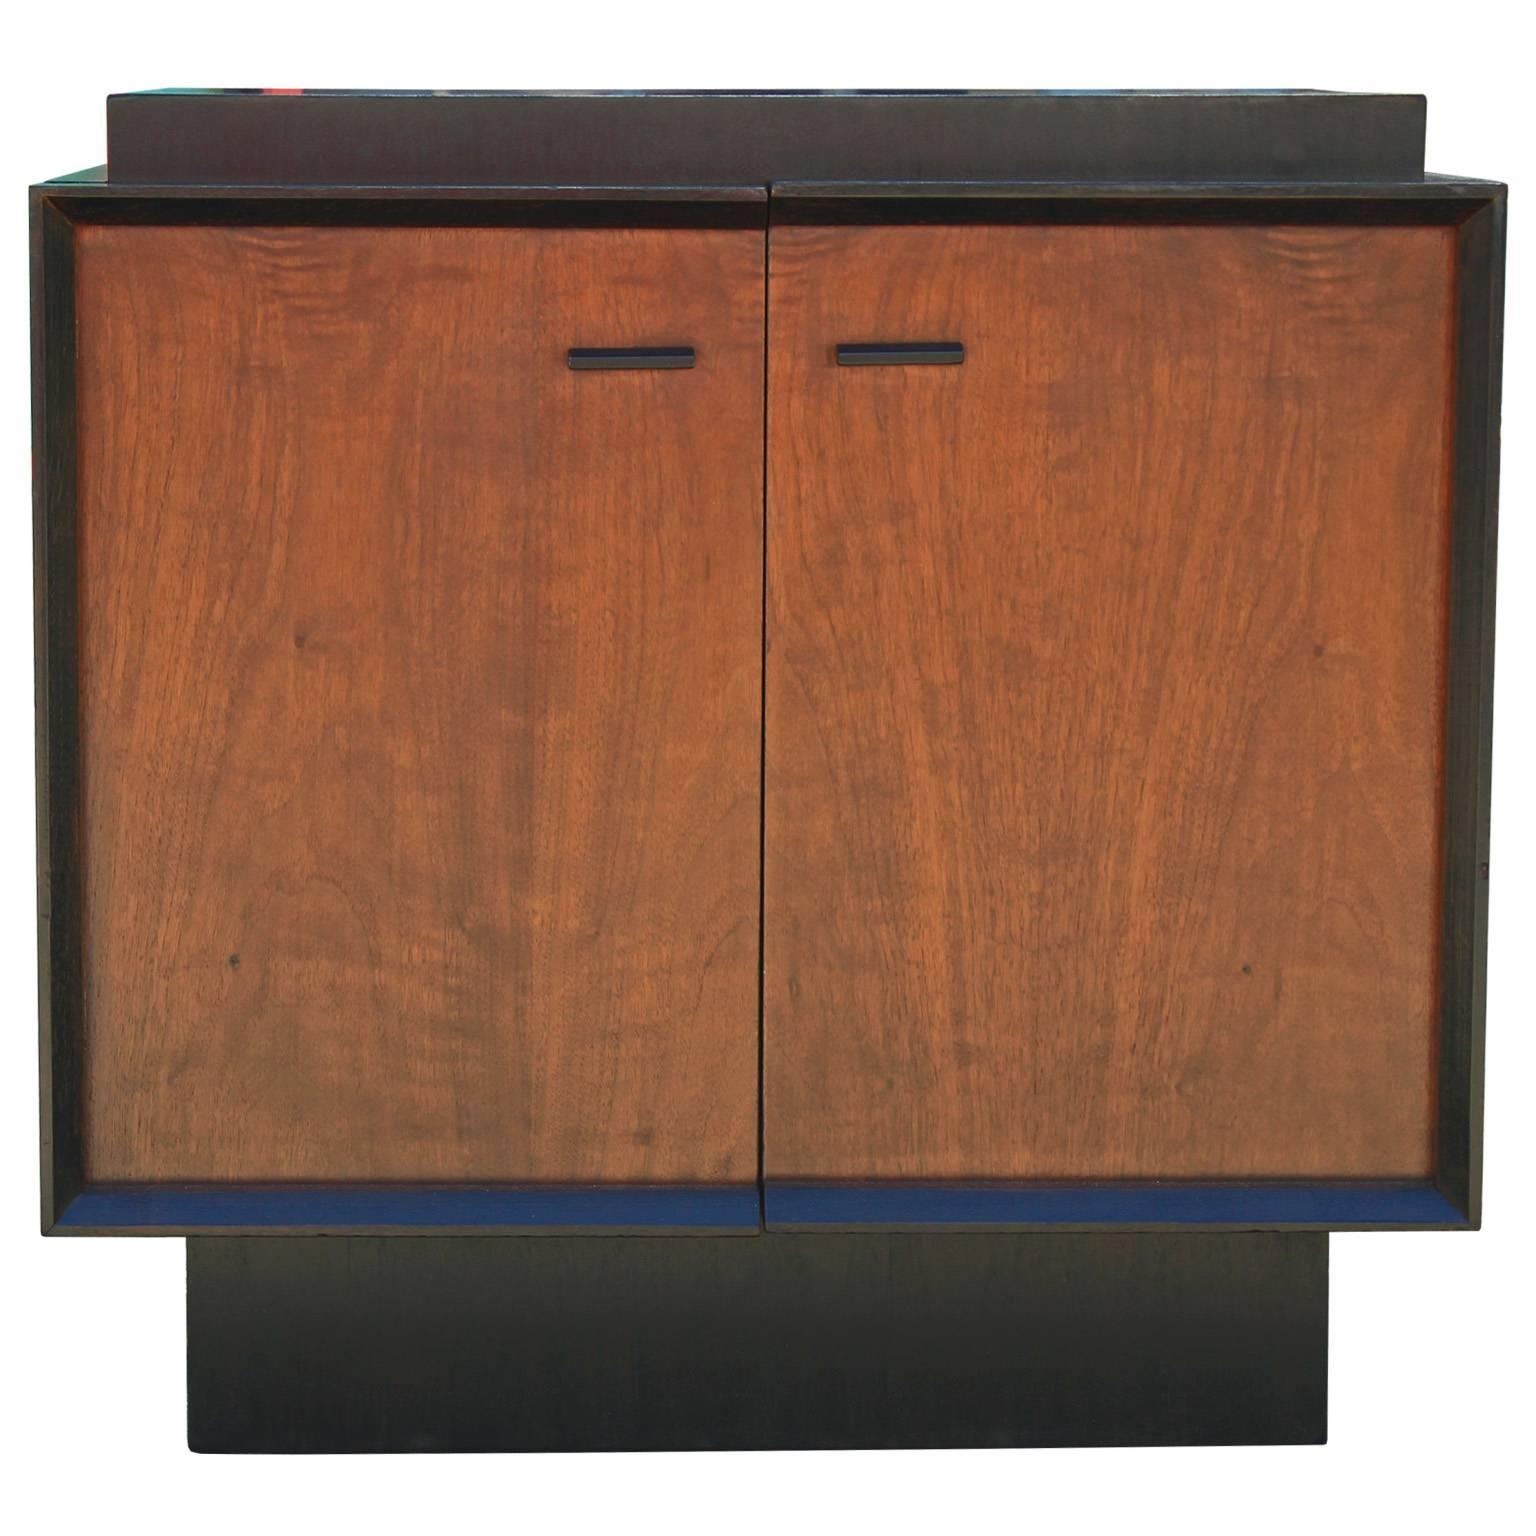 Sleek pair of clean lined bedside tables or small cabinets. Cabinets are nice vintage condition with ebonized cases and medium walnut doors. Doors open to a single shelf. Tables have wonderful, bold clean lines.